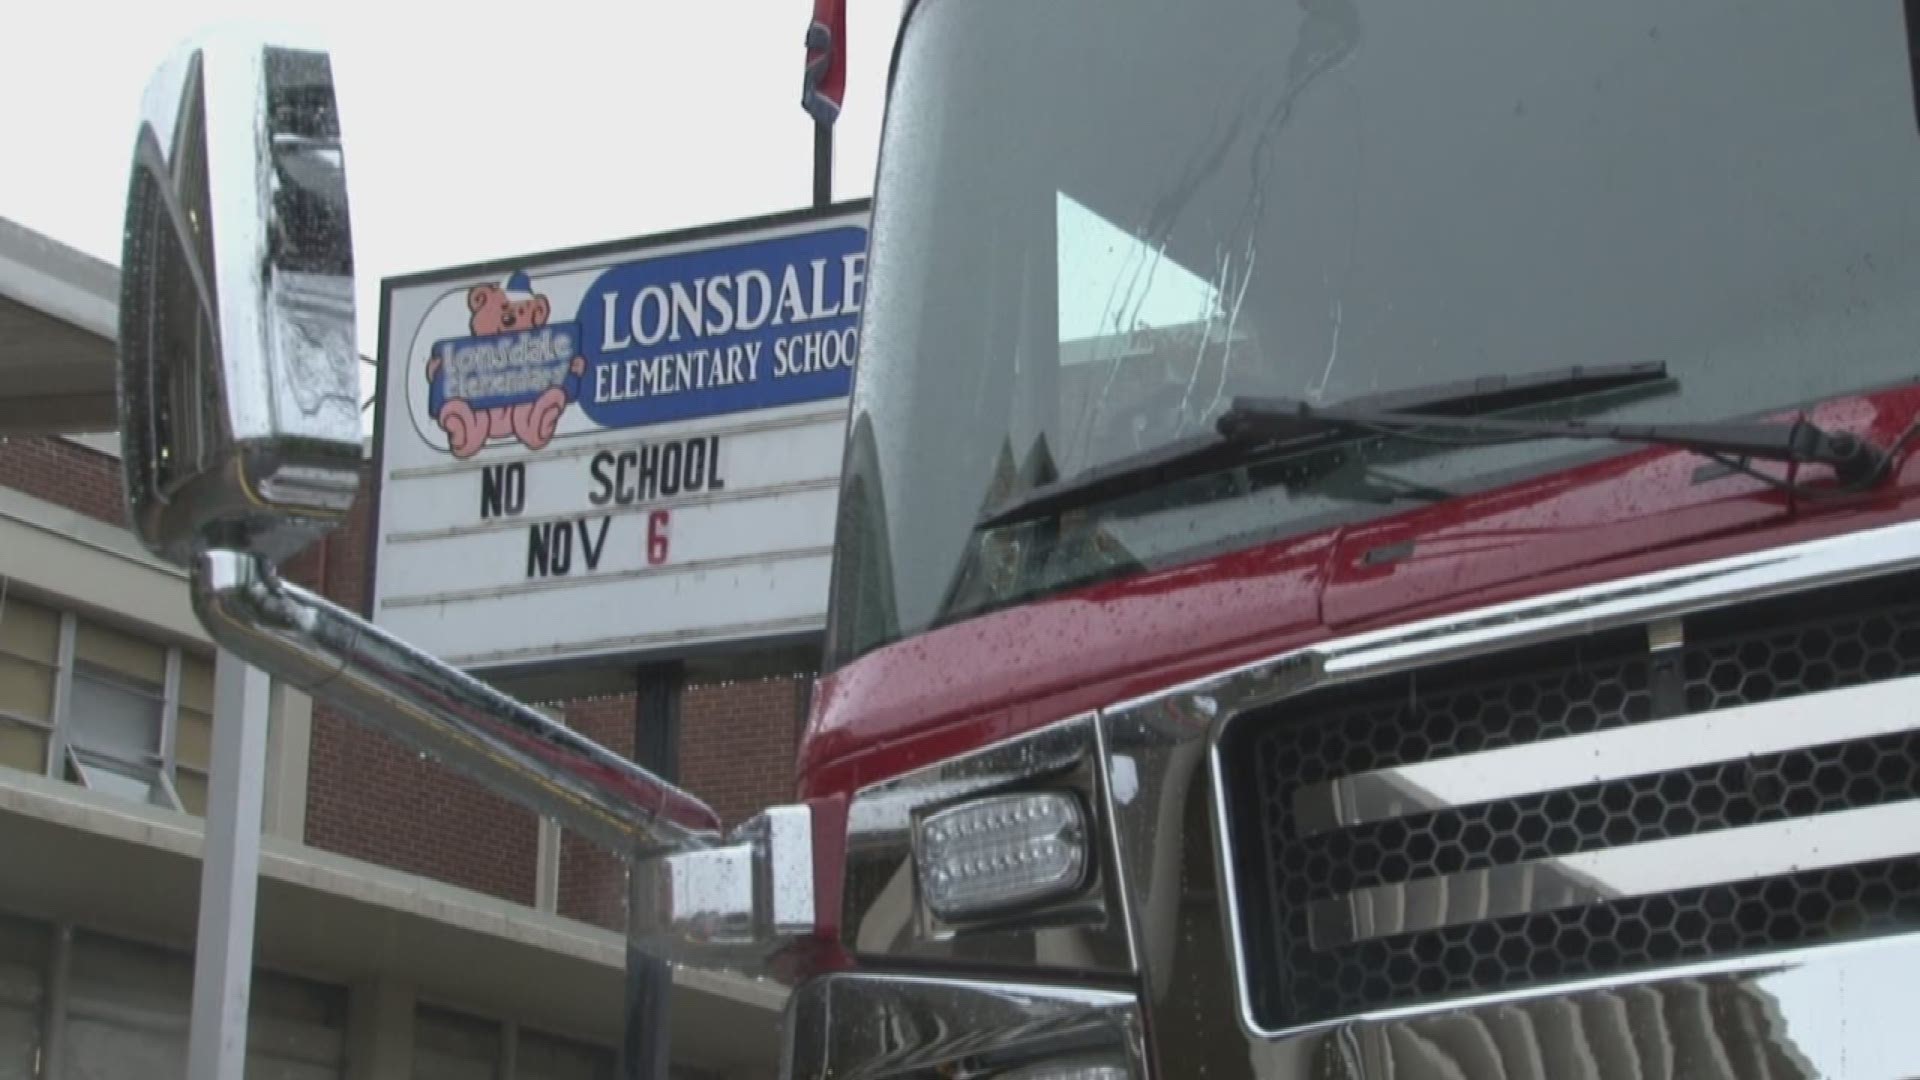 The Knoxville Fire Department says the school reported haze in the hallway just before 7:30 this morning. KFD says there was an elevated level of carbon monoxide in the boiler room and throughout the building.